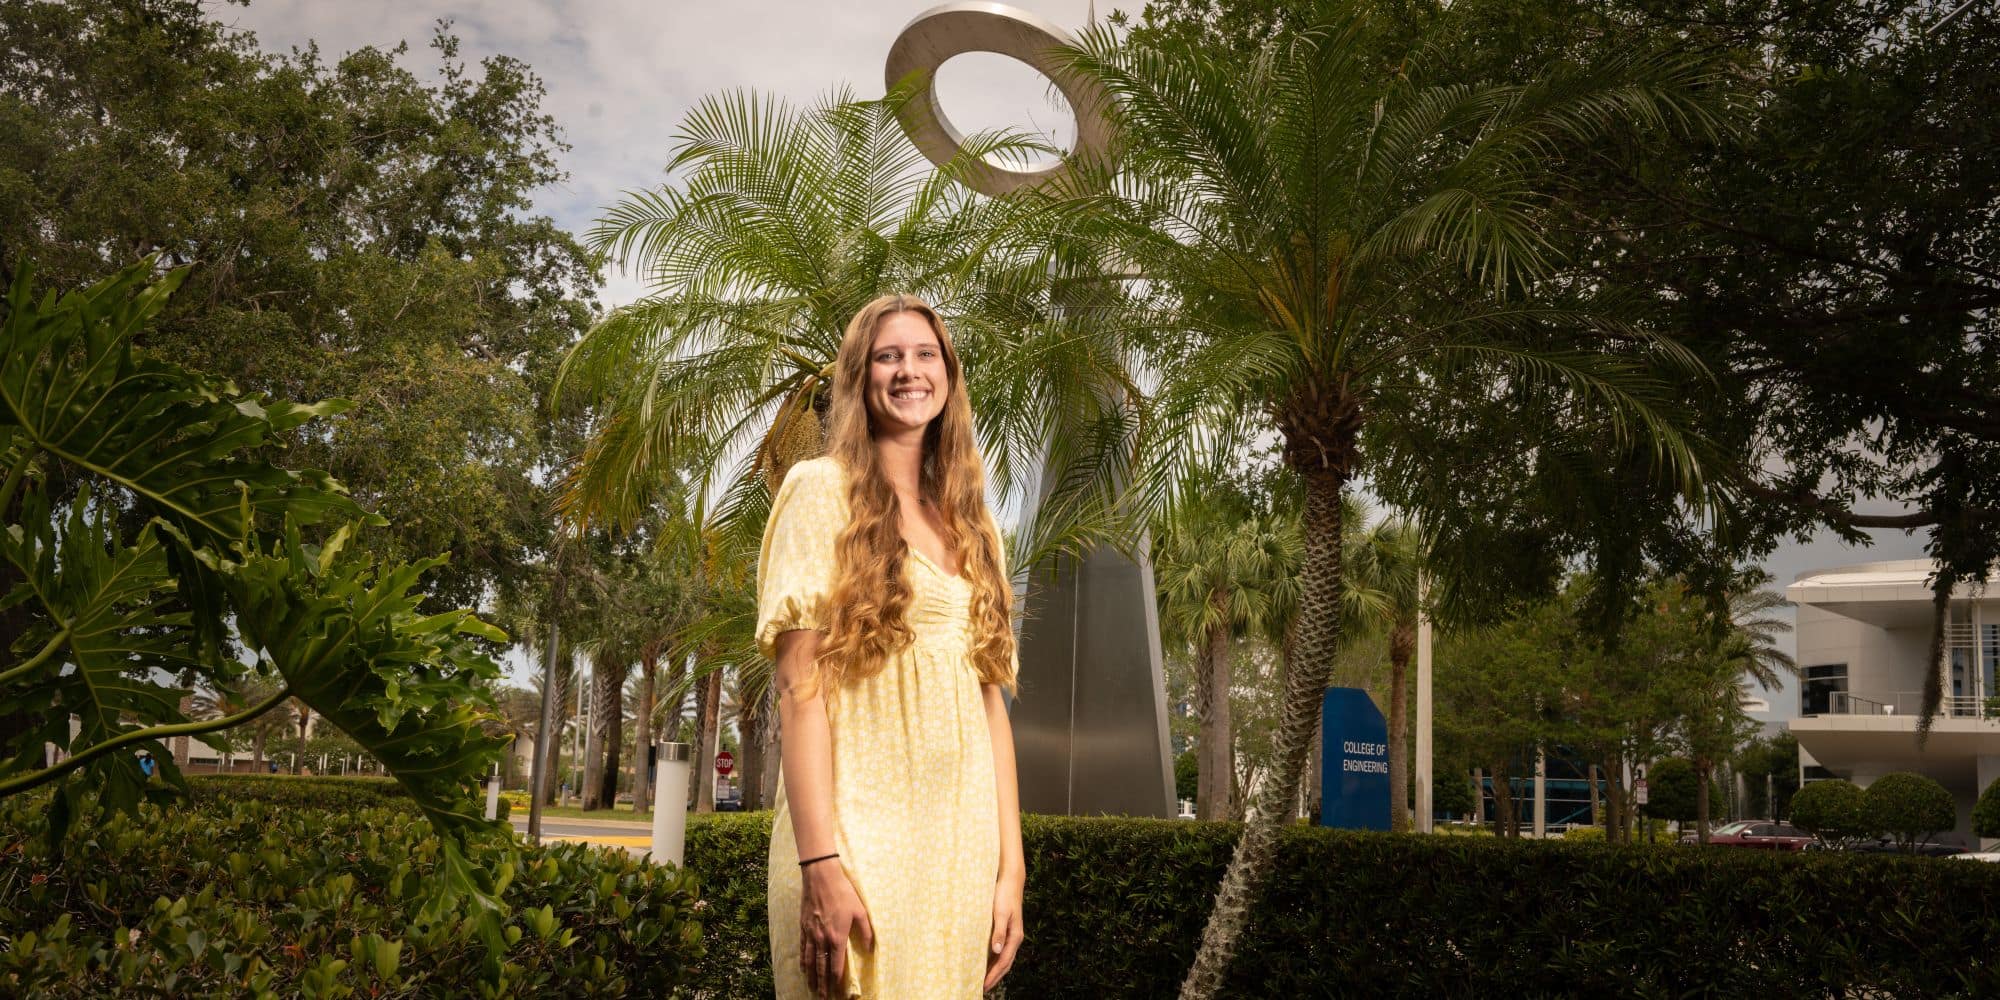 Civil Engineering senior Sydney Makarovich is on a path to success post-graduation, with a leader’s mindset and an exciting position secured in her field. (Photo: Embry-Riddle / Bill Fredette-Huffman)